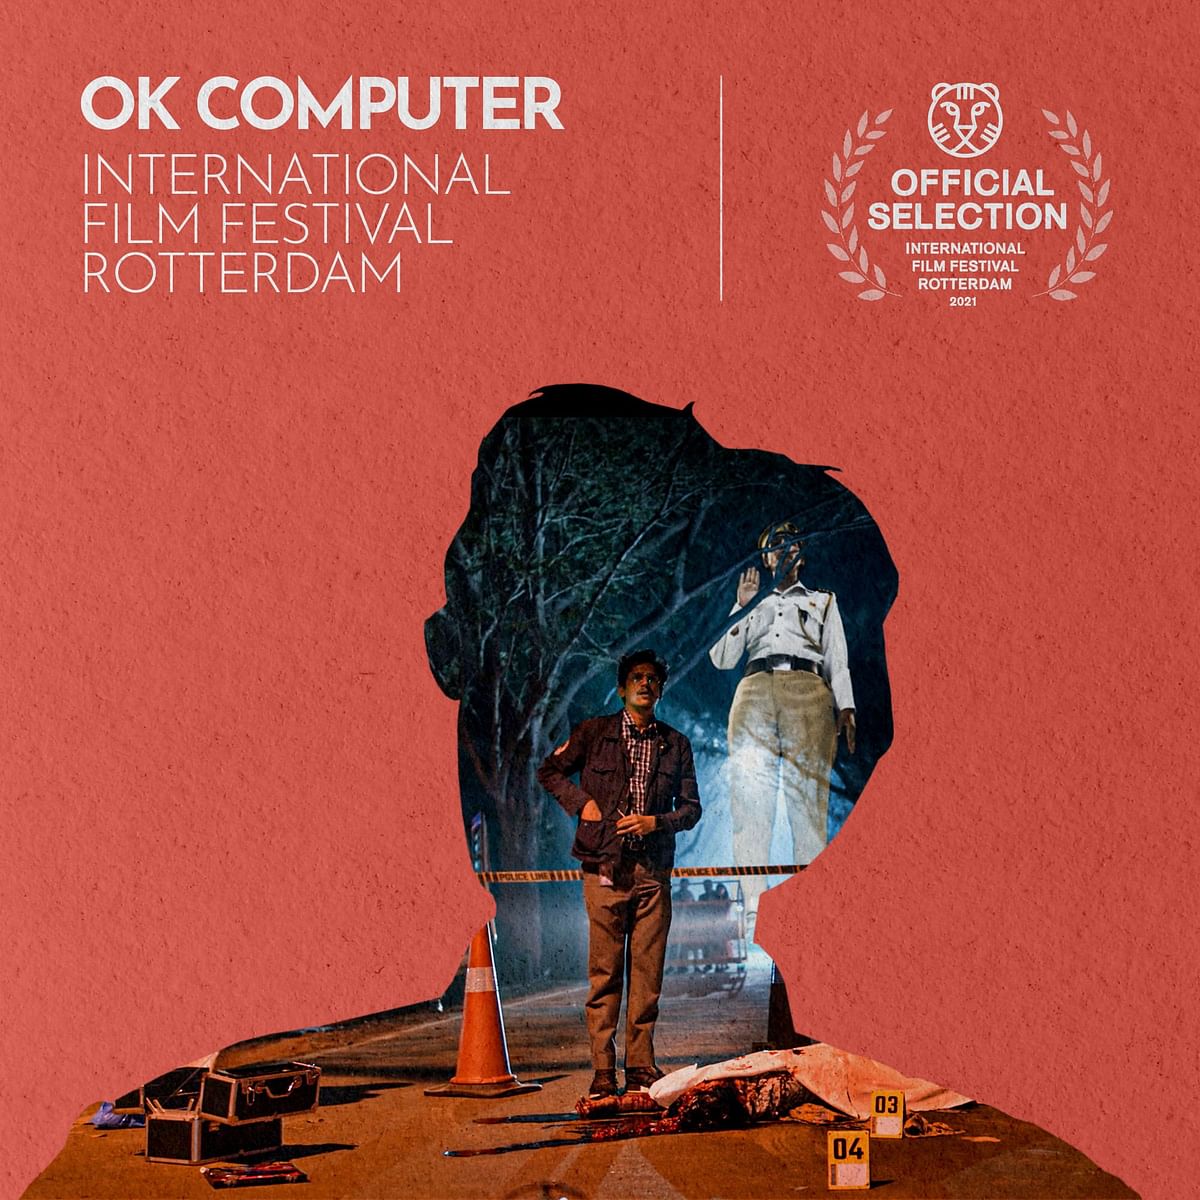 Actor Vijay Varma reacts to ‘OK Computer’ going to IFFR.